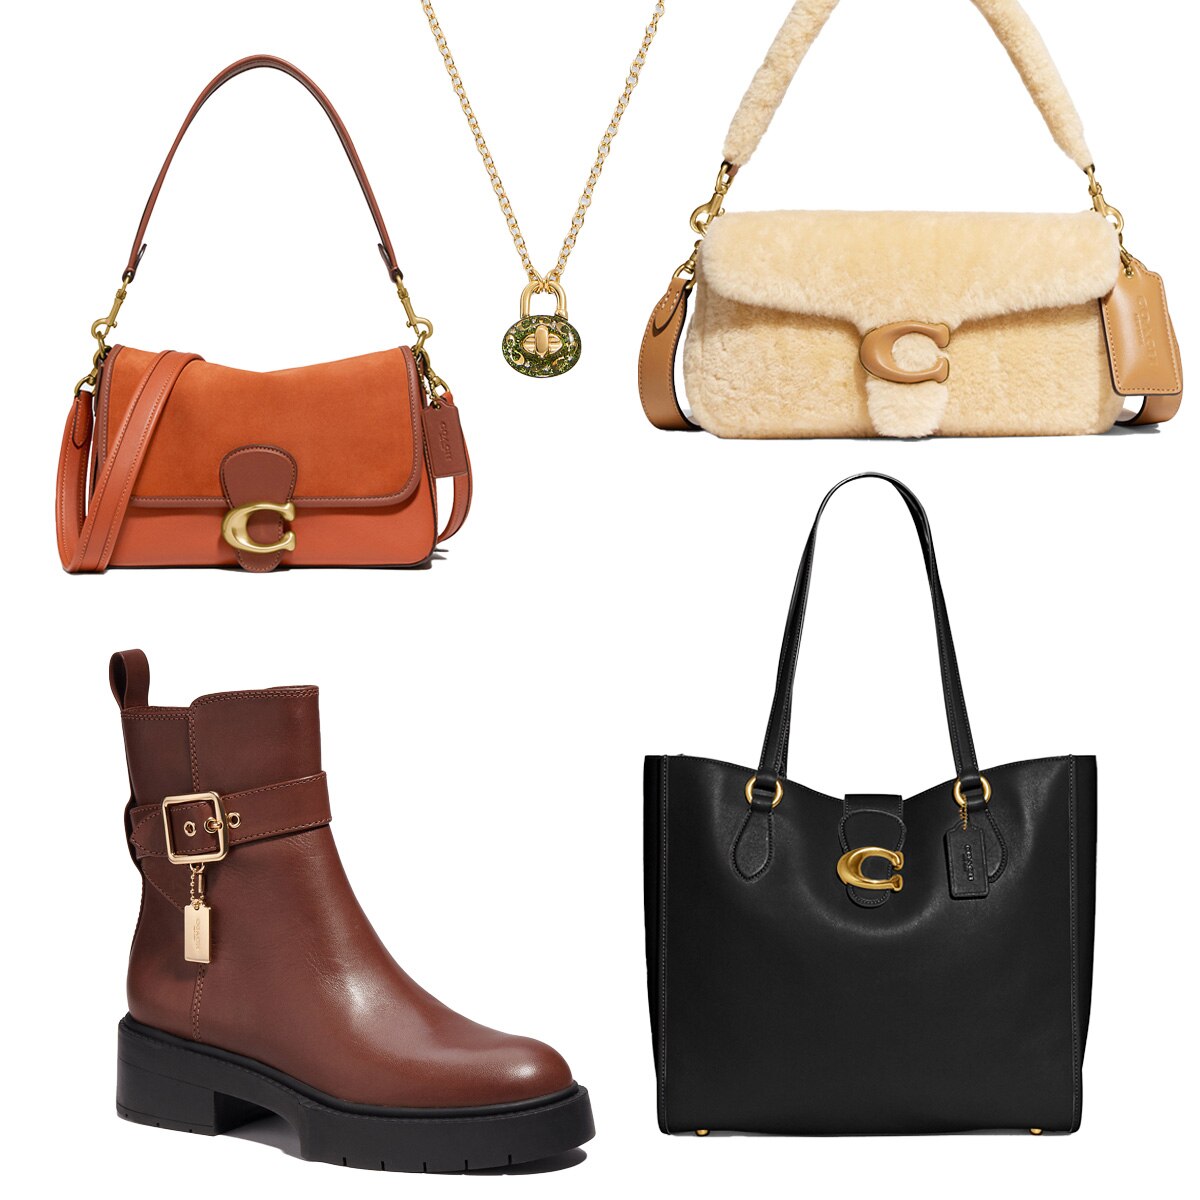 Coach 50% Off Sale: 10 Stylish Bags, Shoes & Accessories We're 